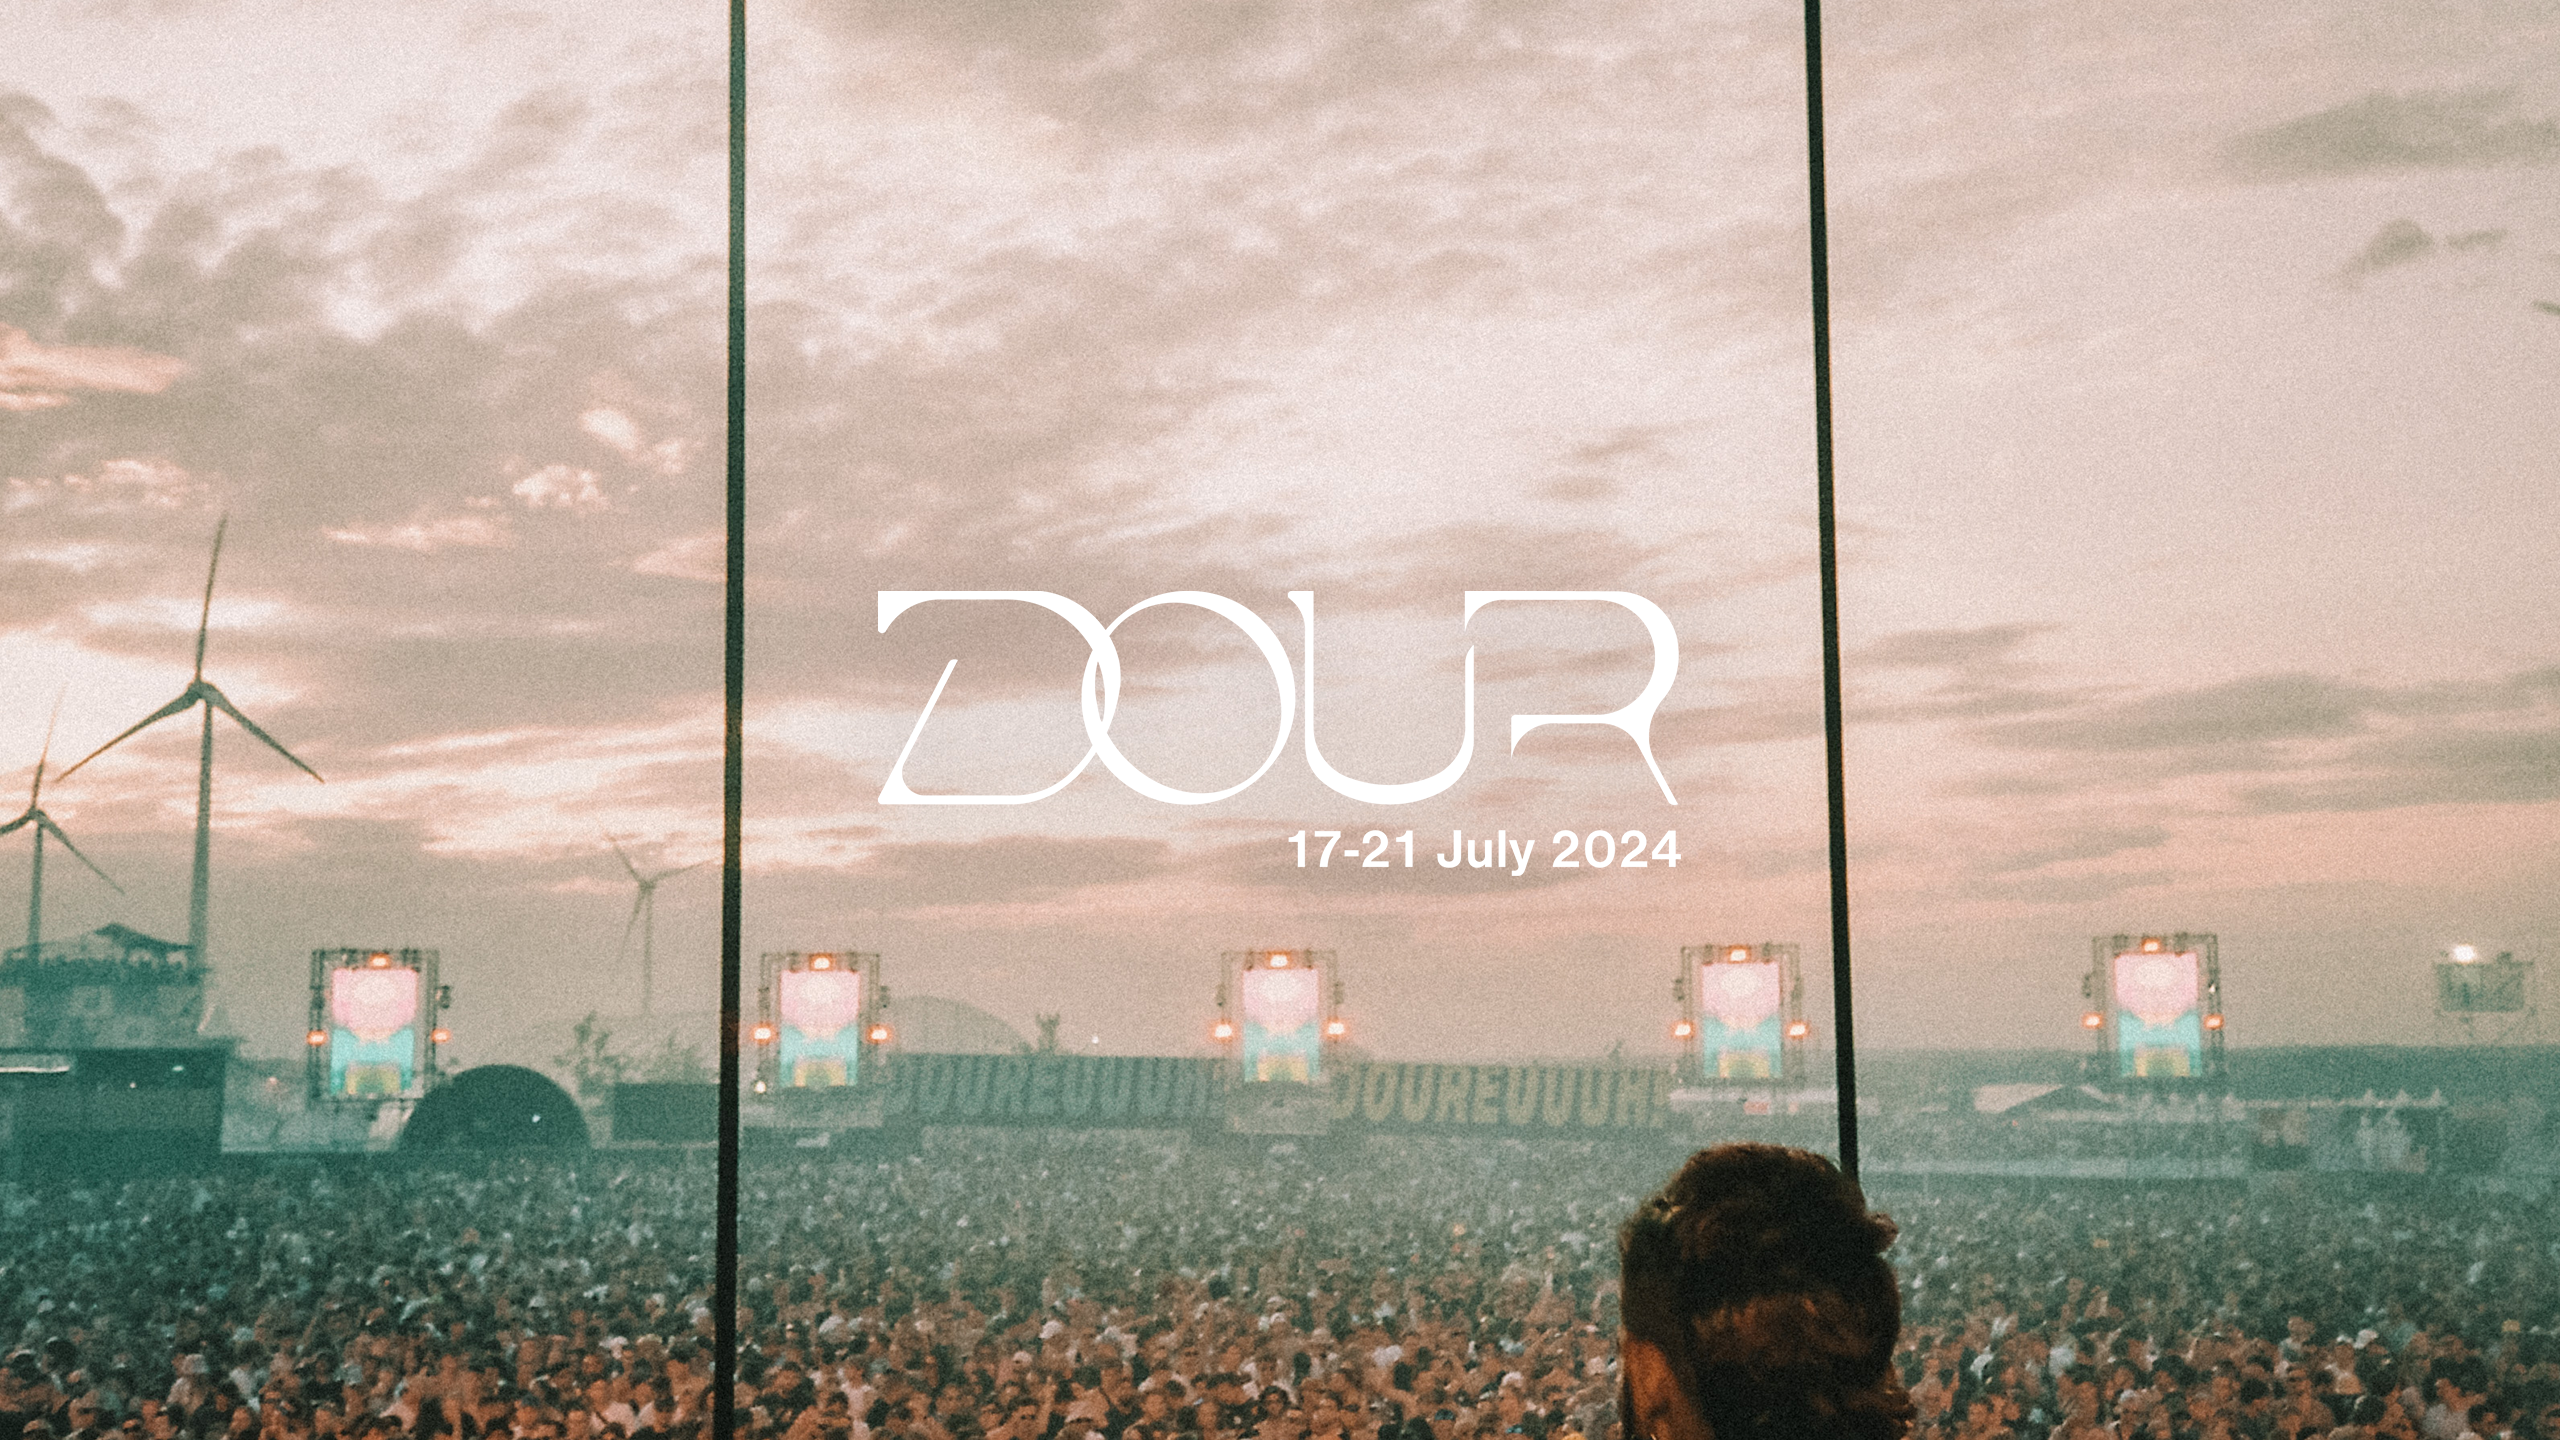 Dour Festival 2024 - Day 1 - フライヤー表